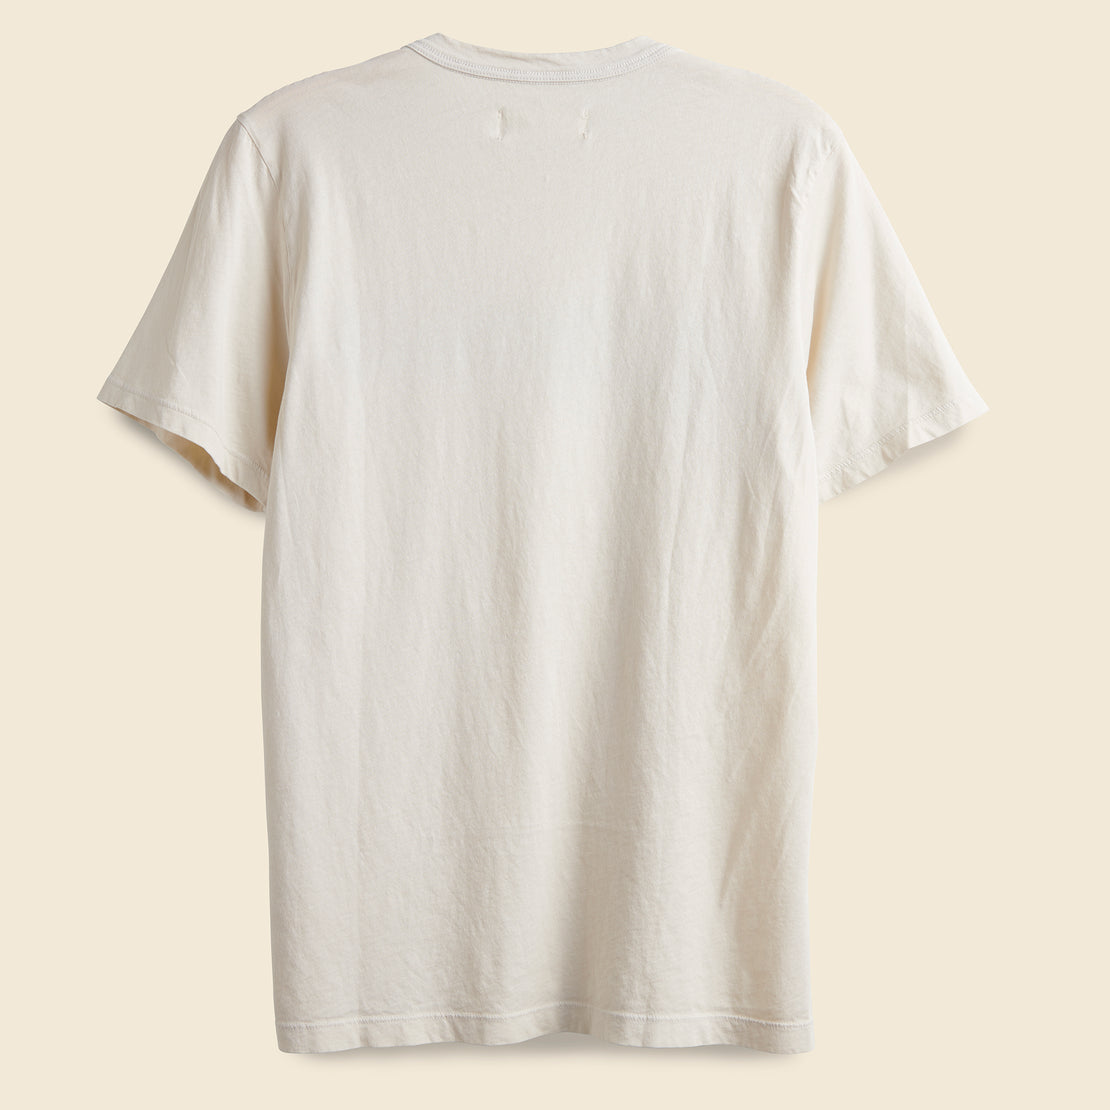 Daughters Tee - White - Imogene + Willie - STAG Provisions - W - Tops - S/S Tee